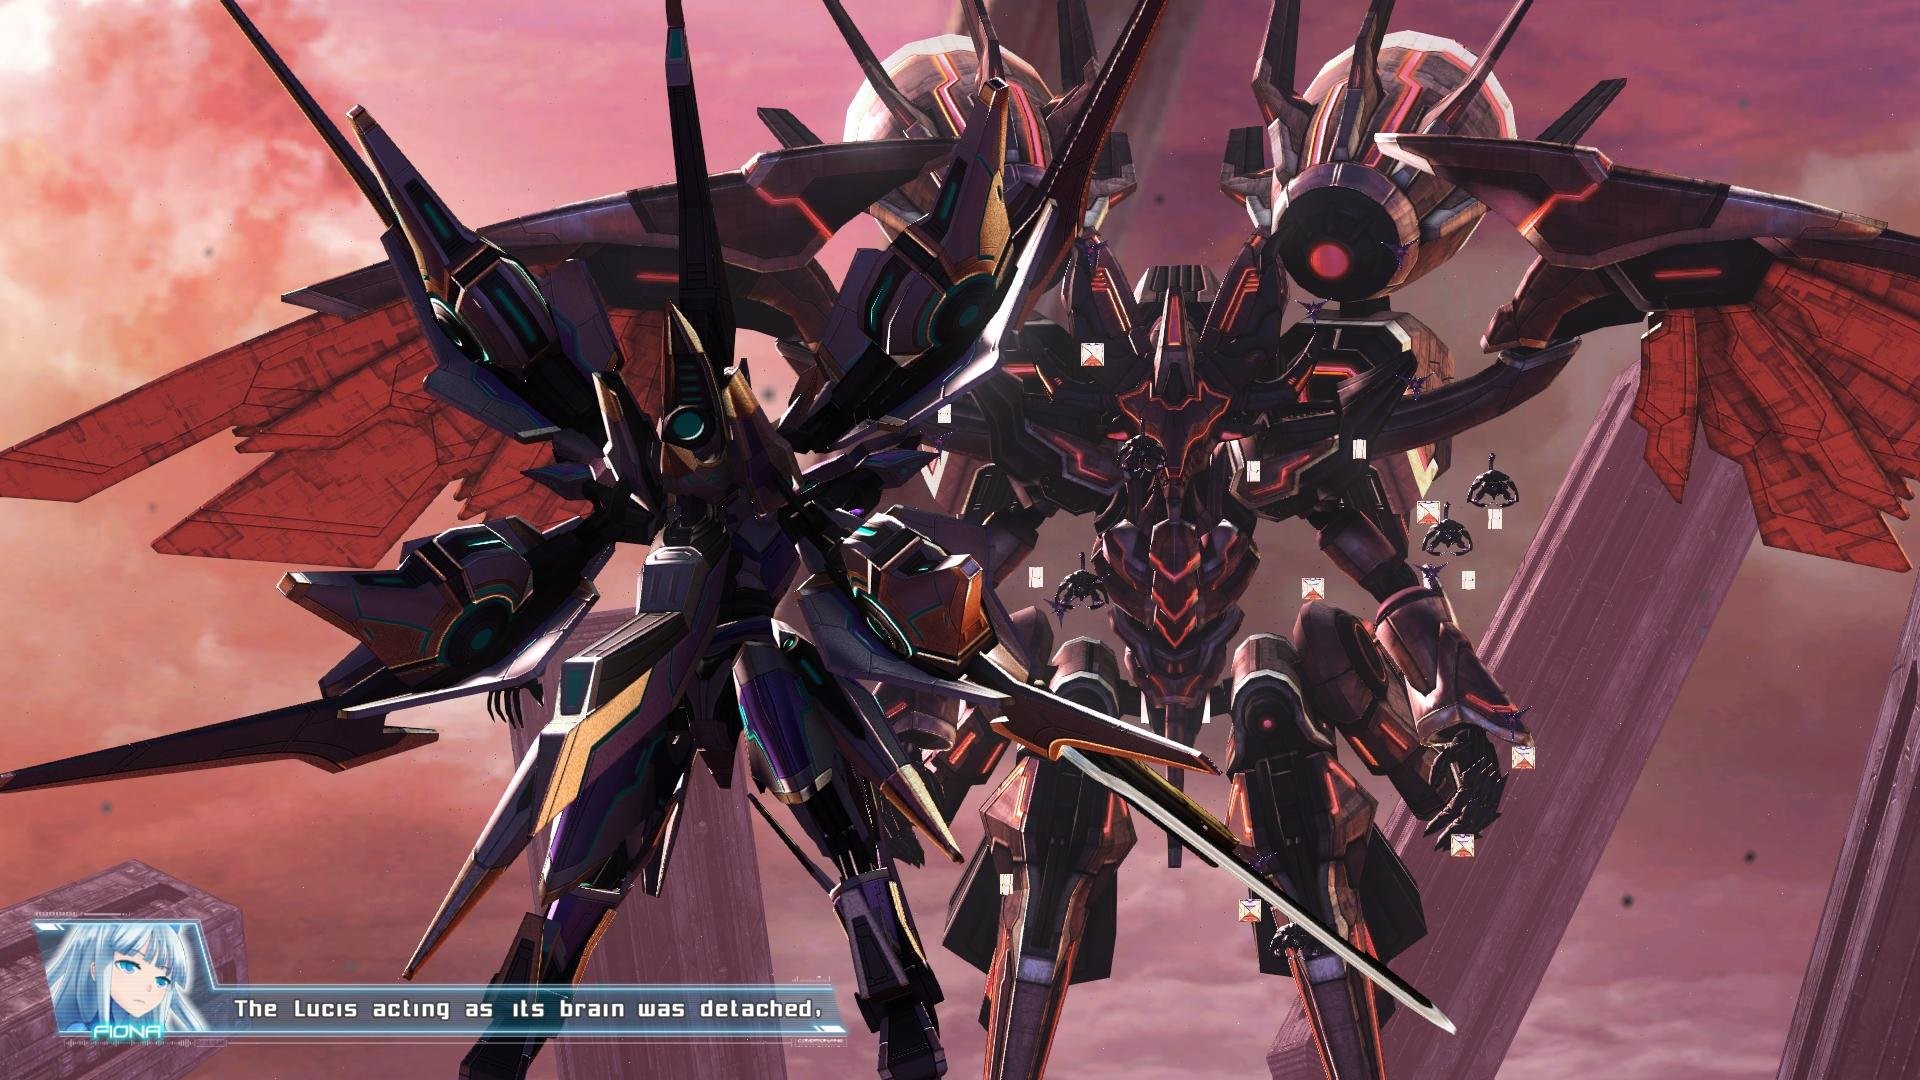 1920x1080 ASTEBREED sci-fi anime shooter fantasy action fighting mecha poster  wallpaper |  | 833285 | WallpaperUP